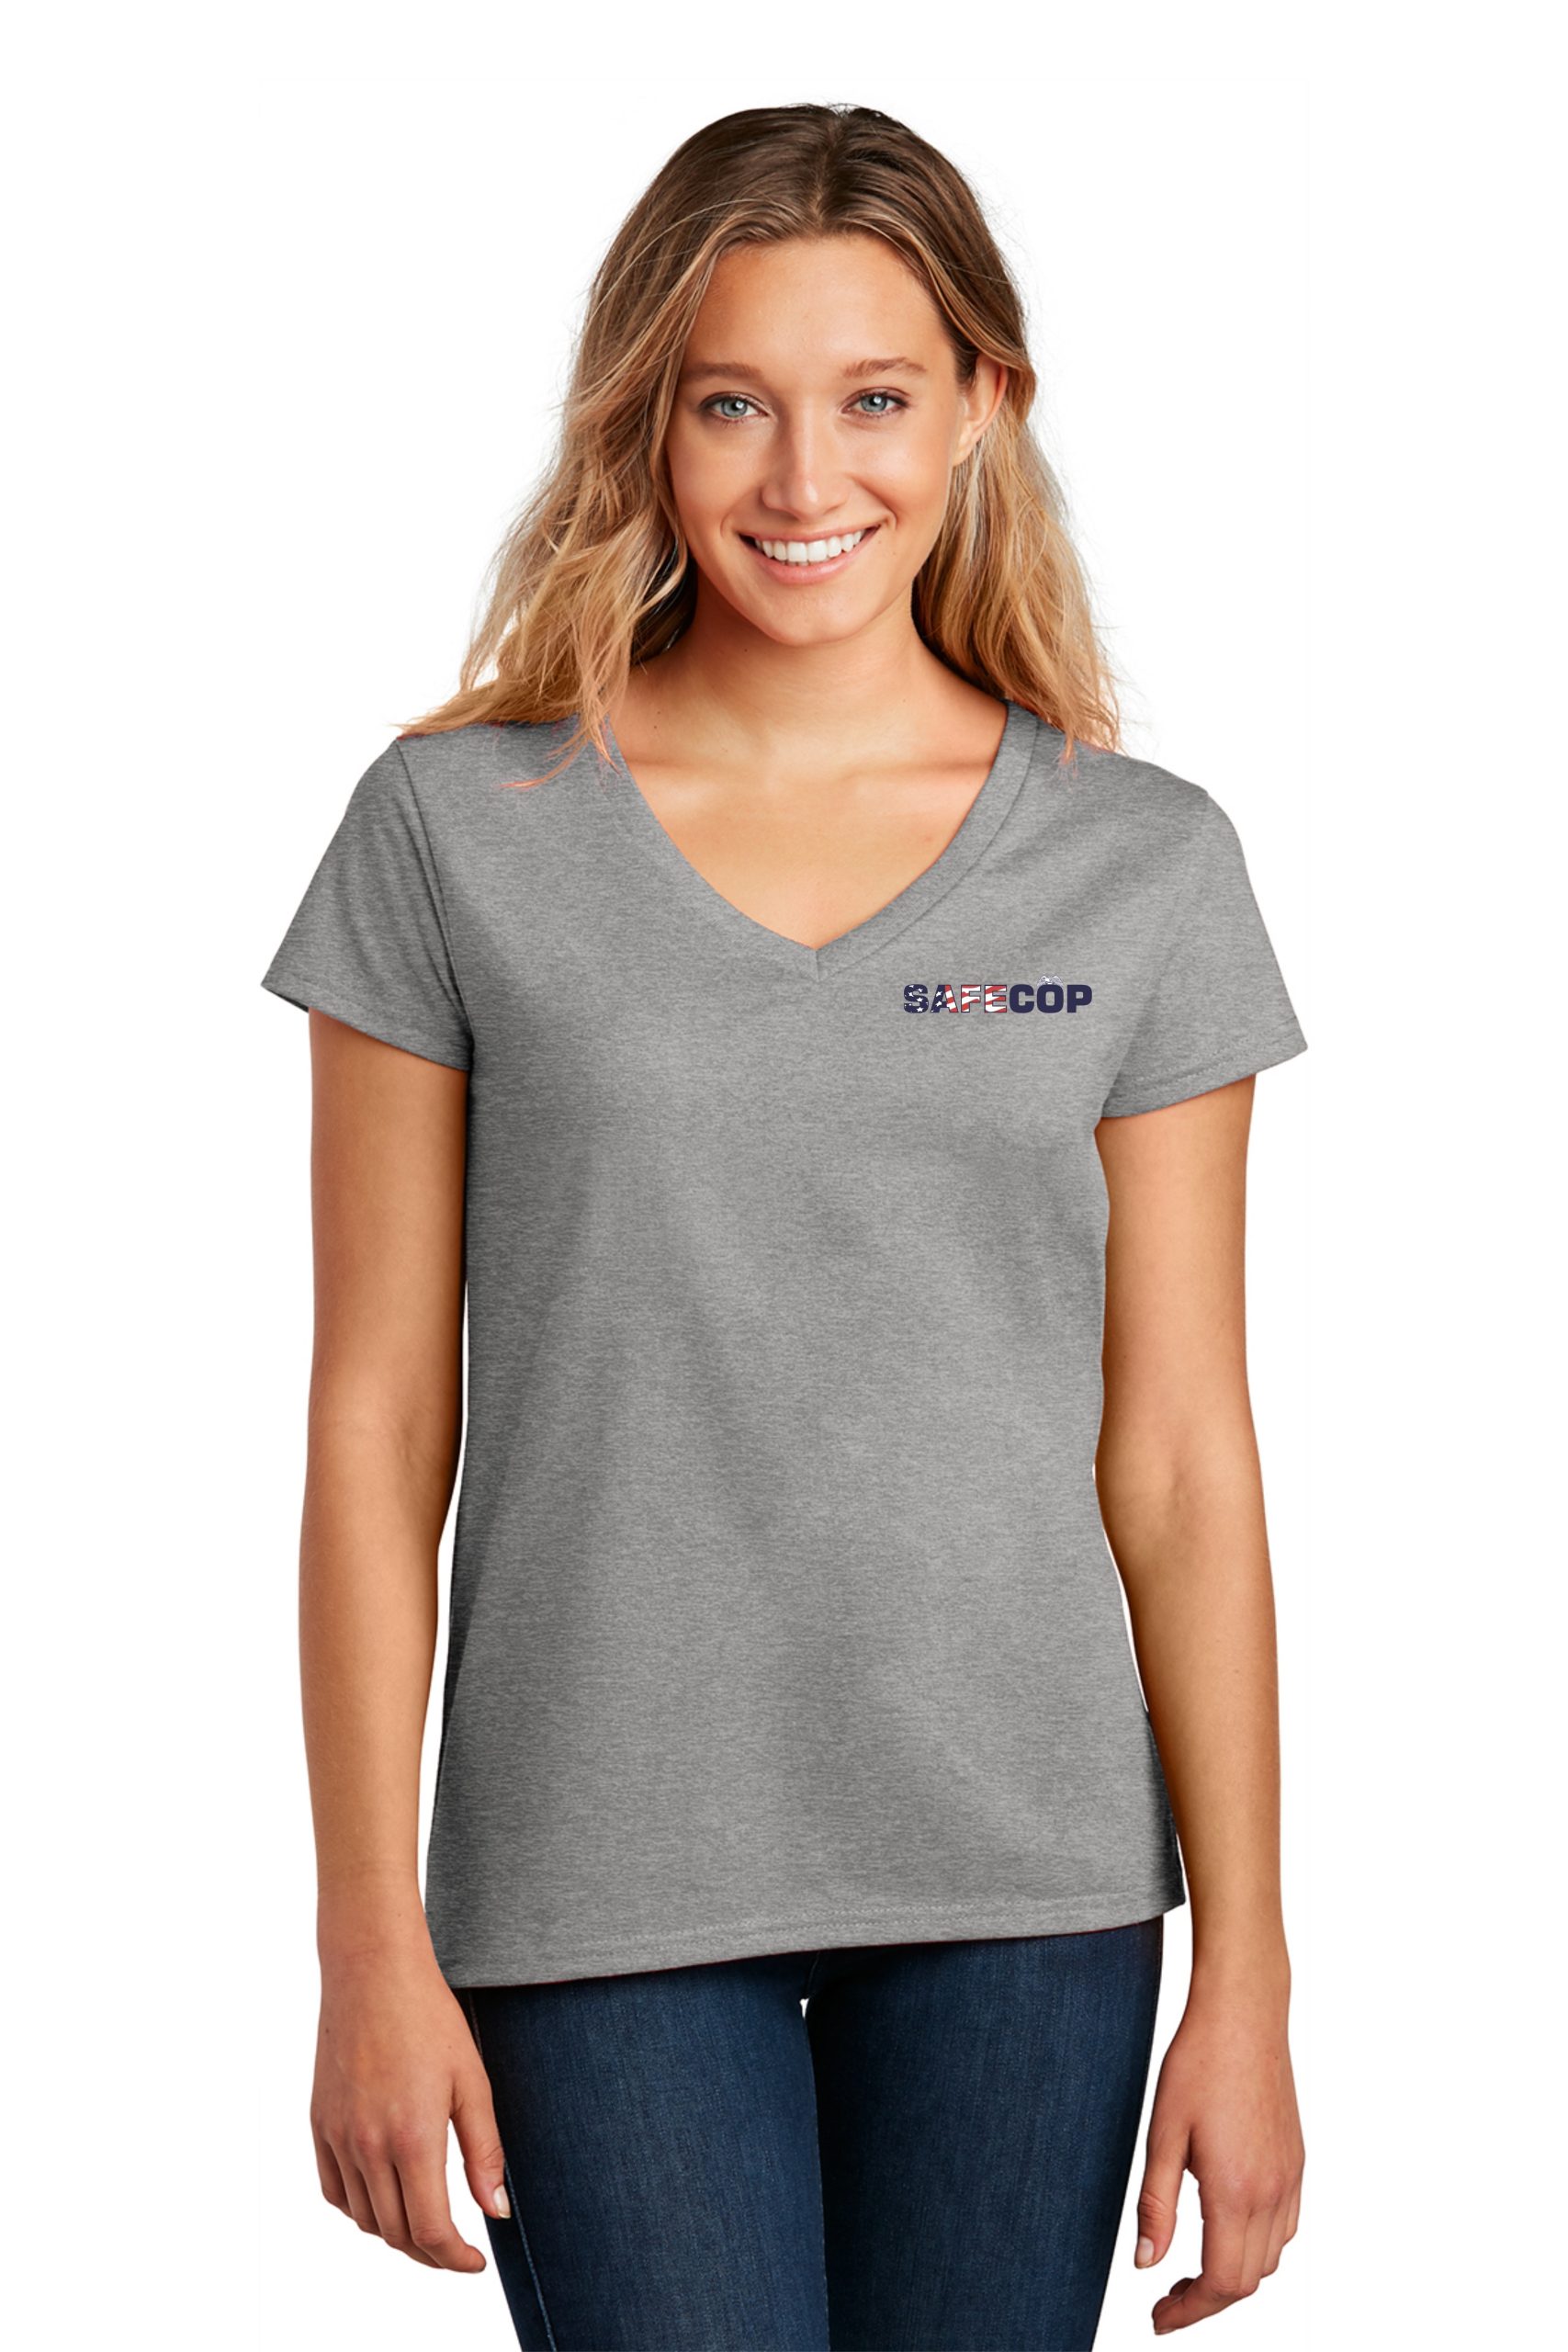 Women’s Safe Cop Double-Sided Tee Image